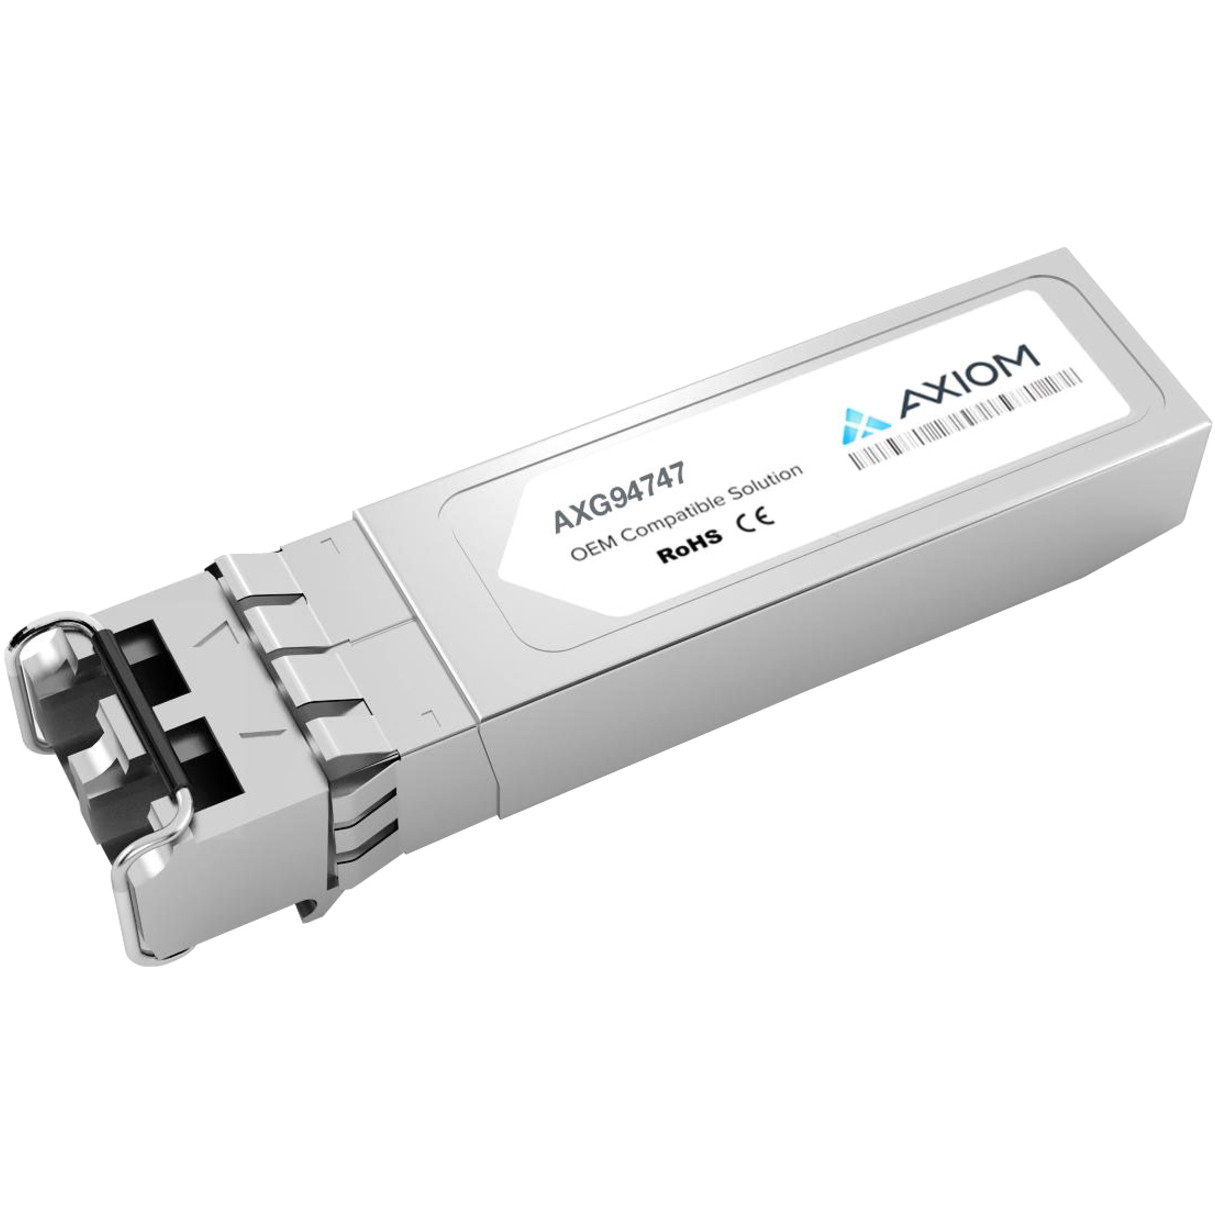 Axiom Memory Solutions 10GBASE-SR SFP+ Transceiver for Intel/HPC3N53AATAA Compliant100% HP Compatible 10GBASE-SR SFP+ AXG94747